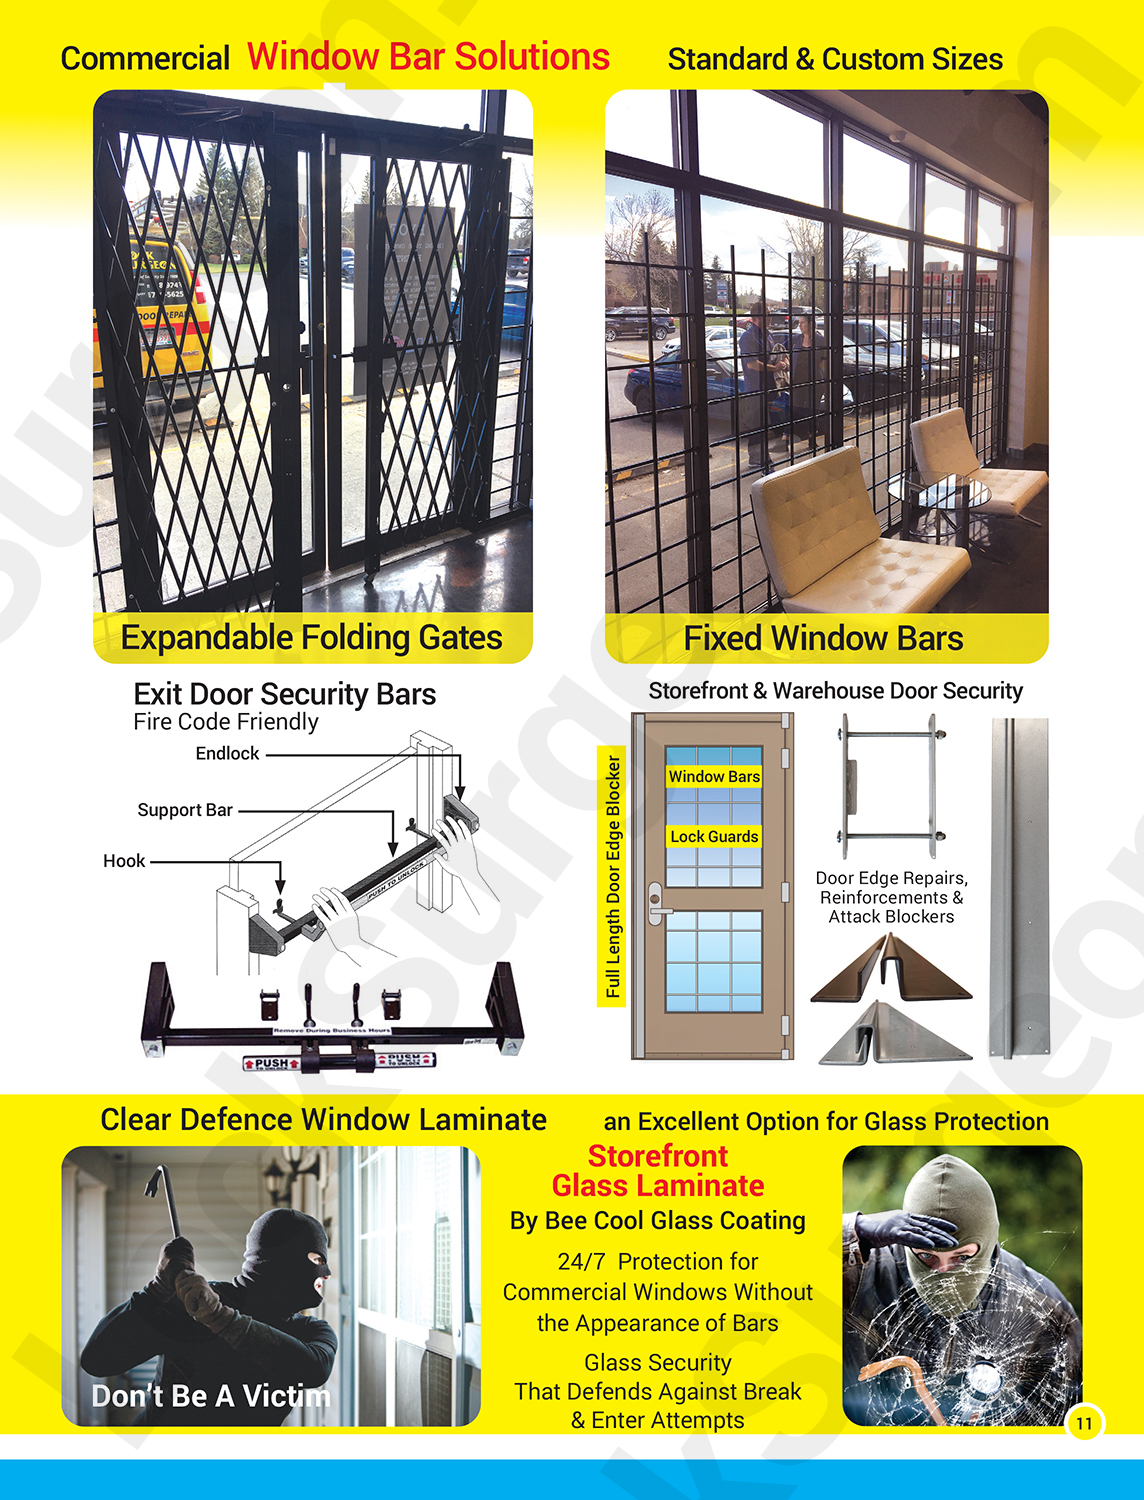 Window bar solutions in standard and custom sizes expandable folding gates, exit door security bars.